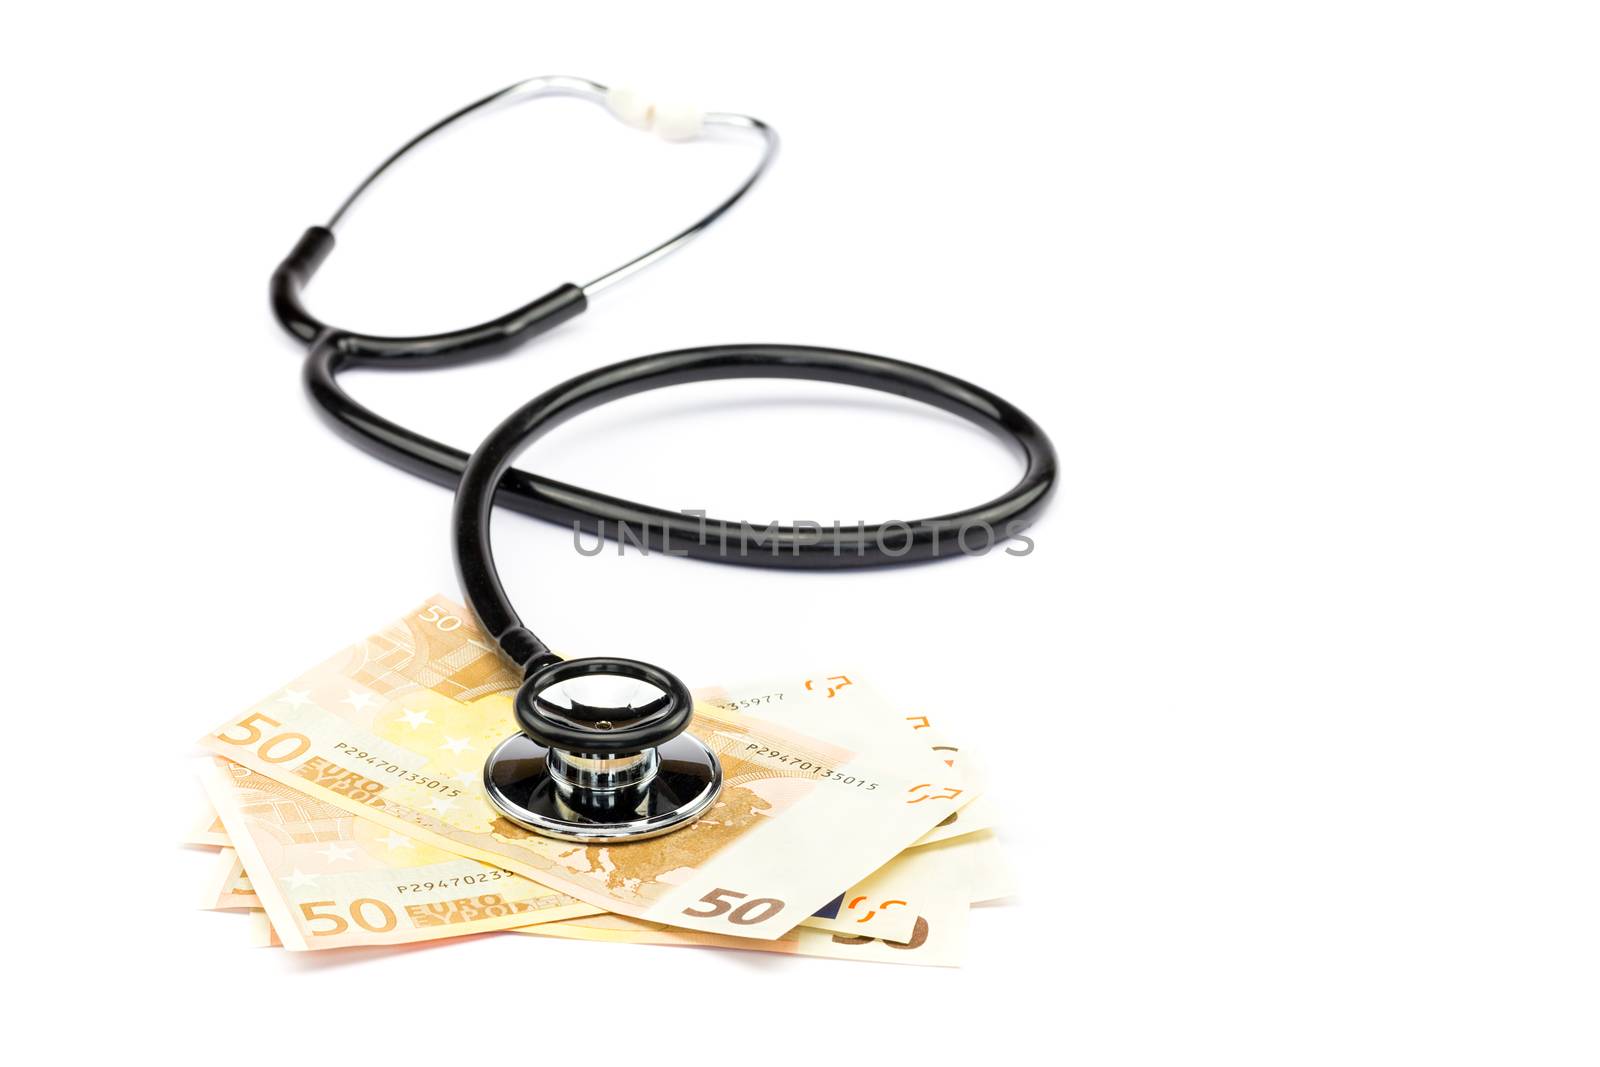 Black professional stethoscope on few fifty euro notes by BenSchonewille